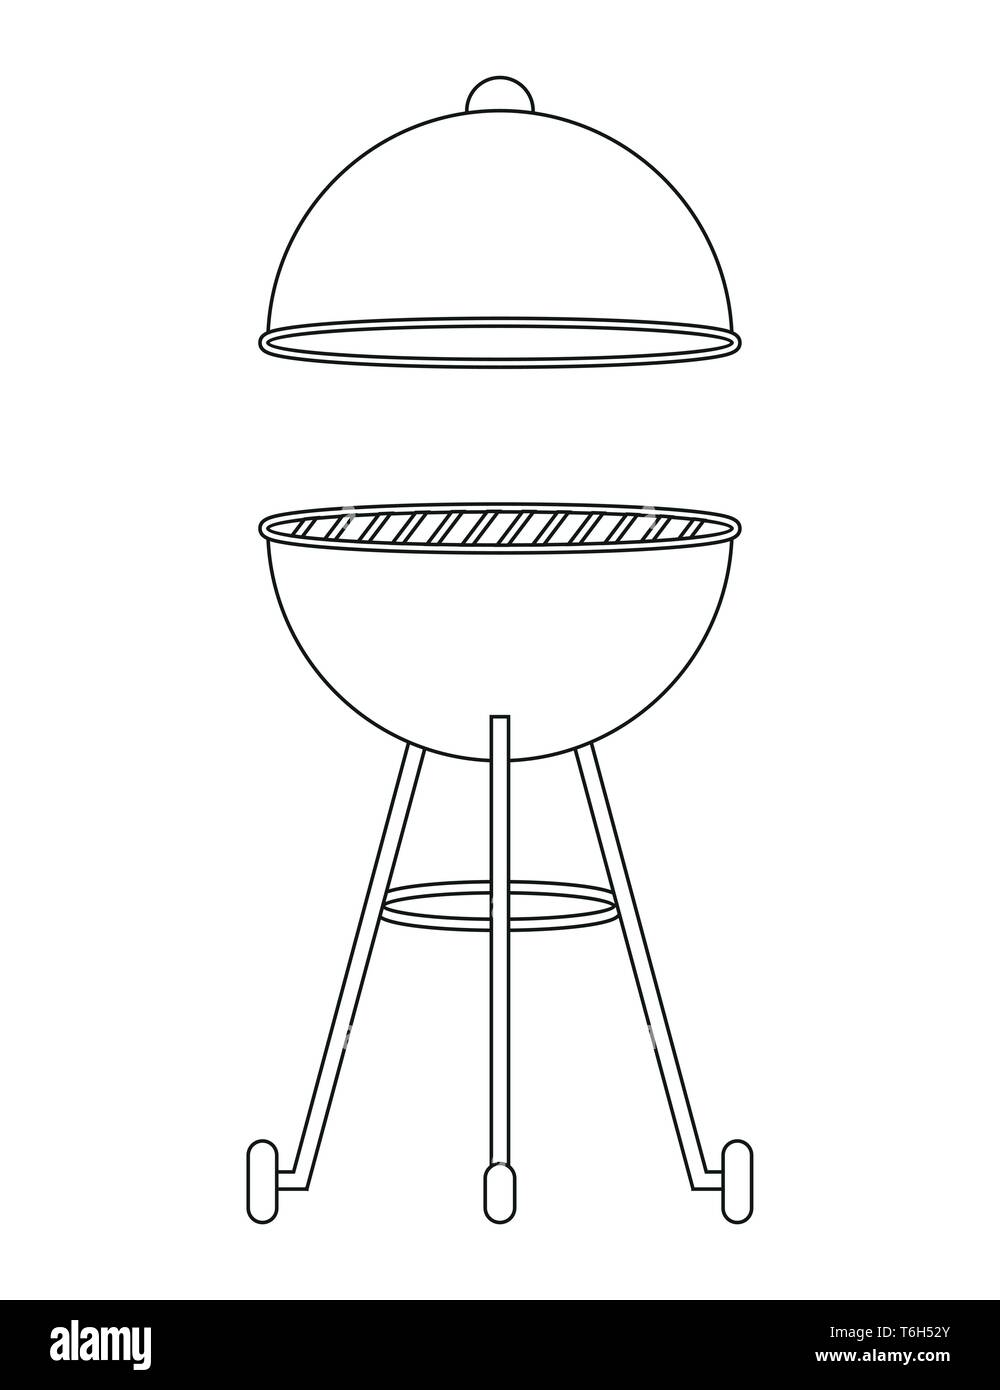 bbq kettle barbecue outline drawing isolated on white background vector illustration EPS10 Stock Vector